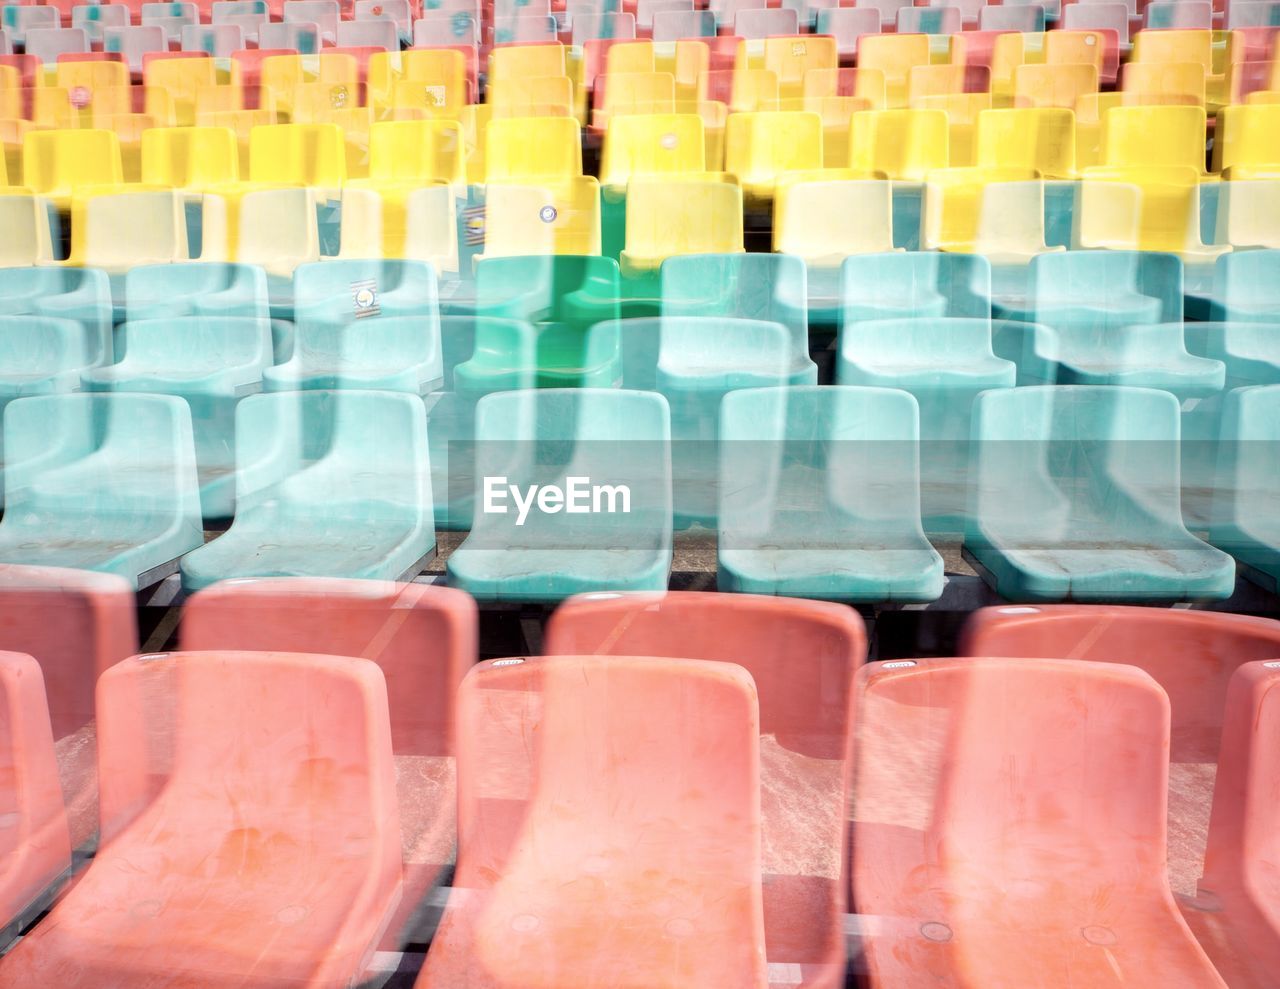 Double exposure image of empty chairs